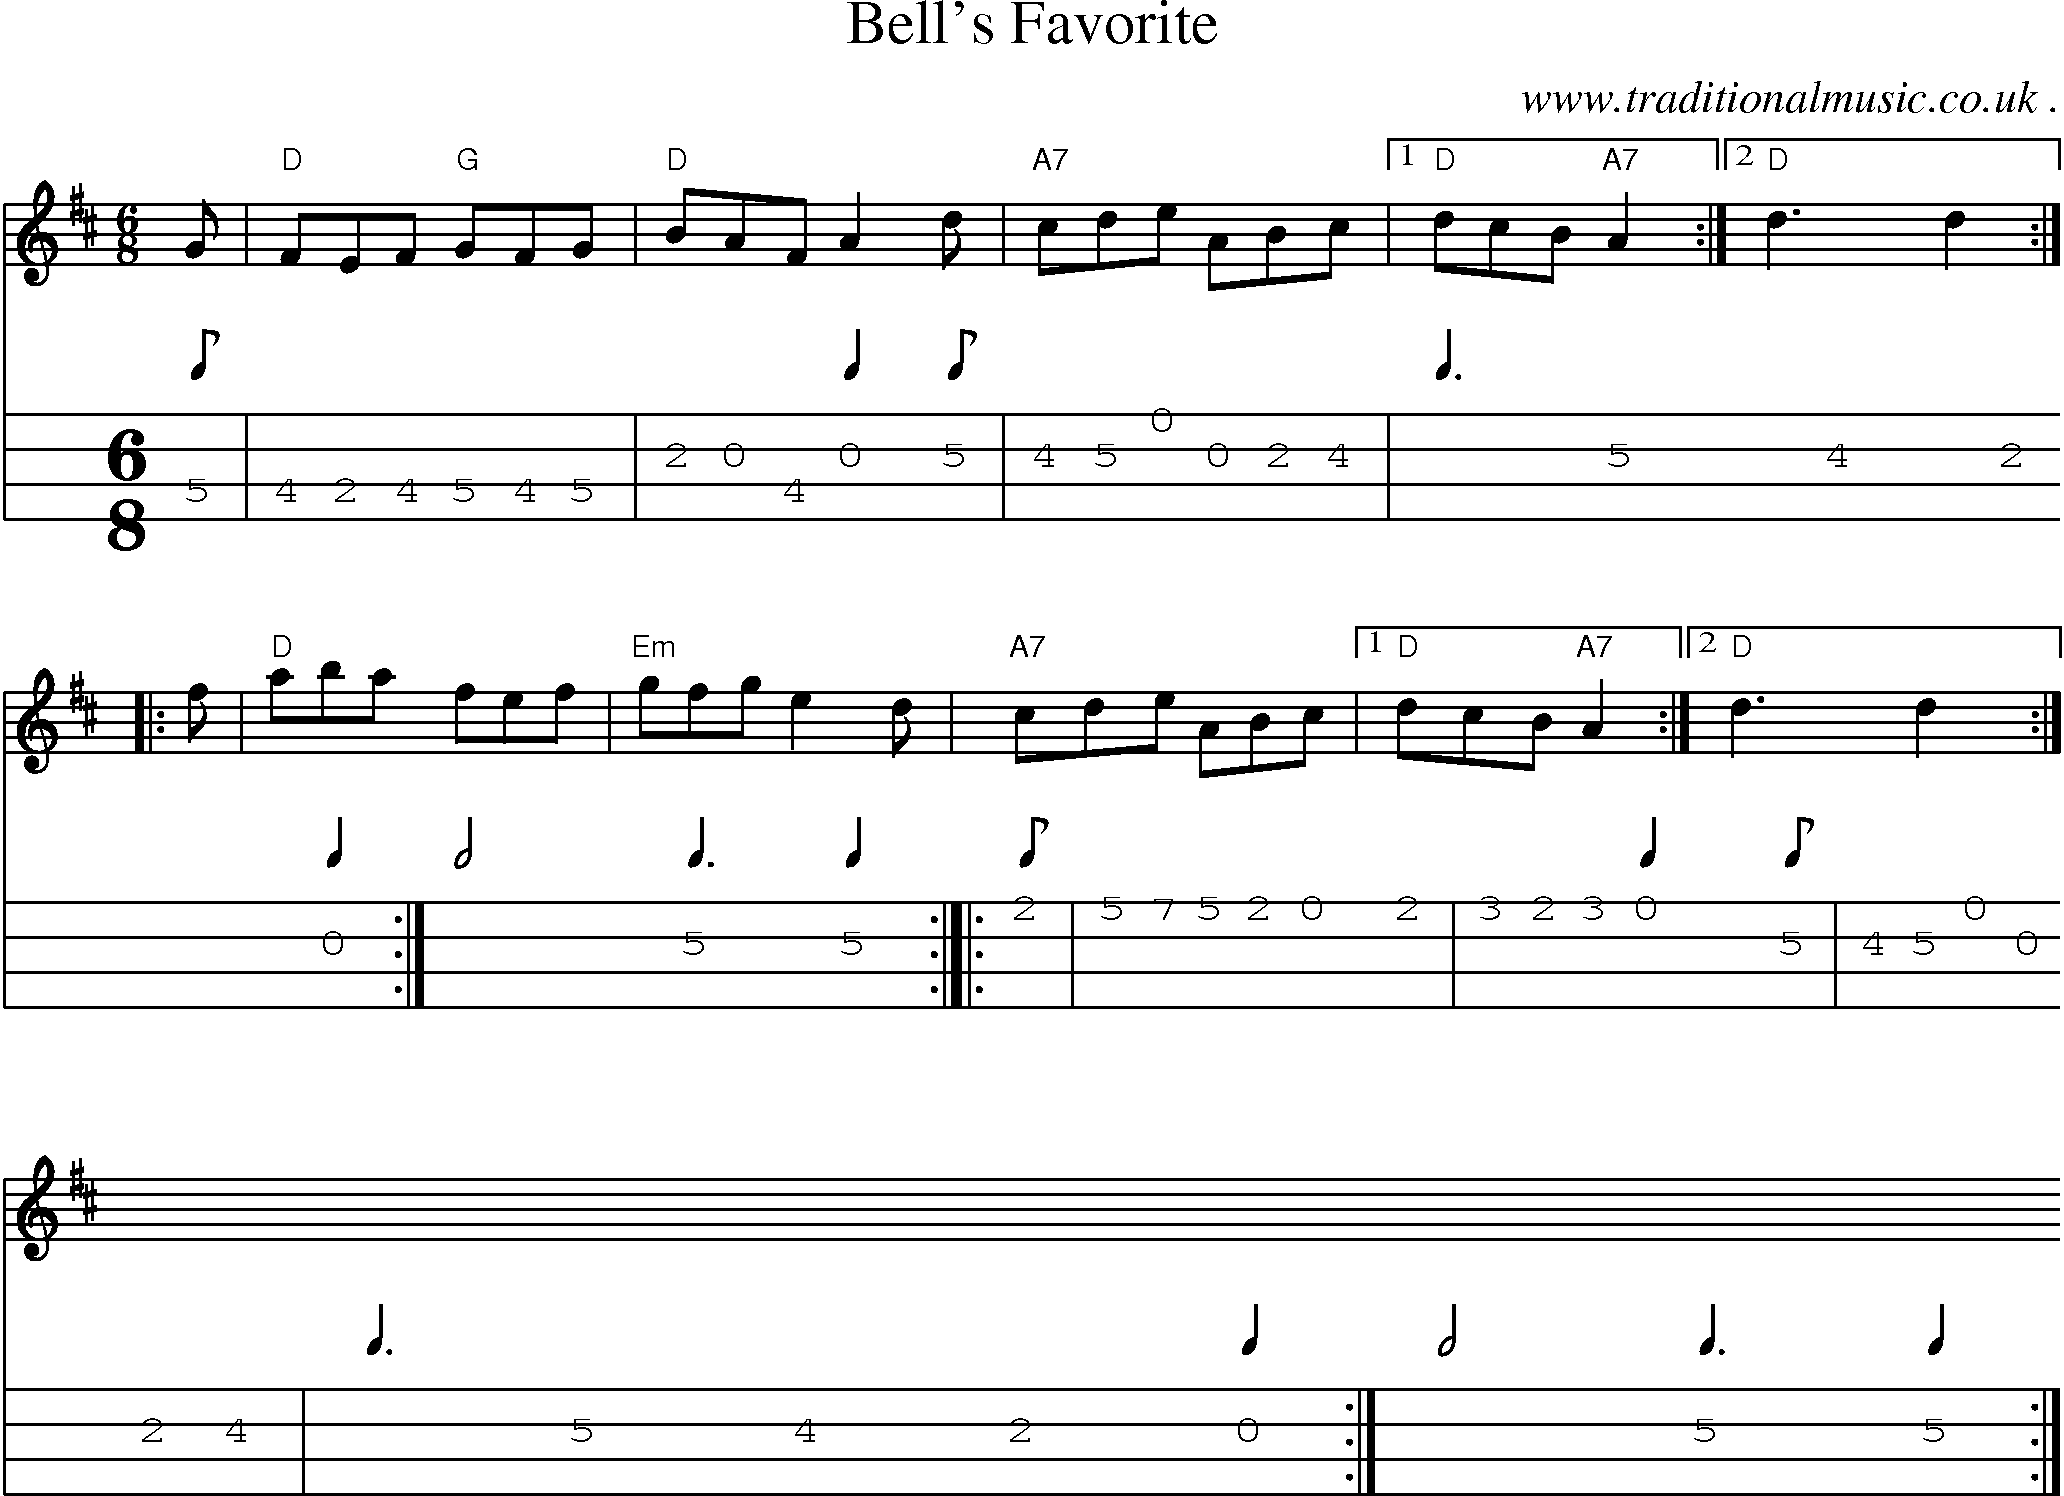 Sheet-music  score, Chords and Mandolin Tabs for Bells Favorite